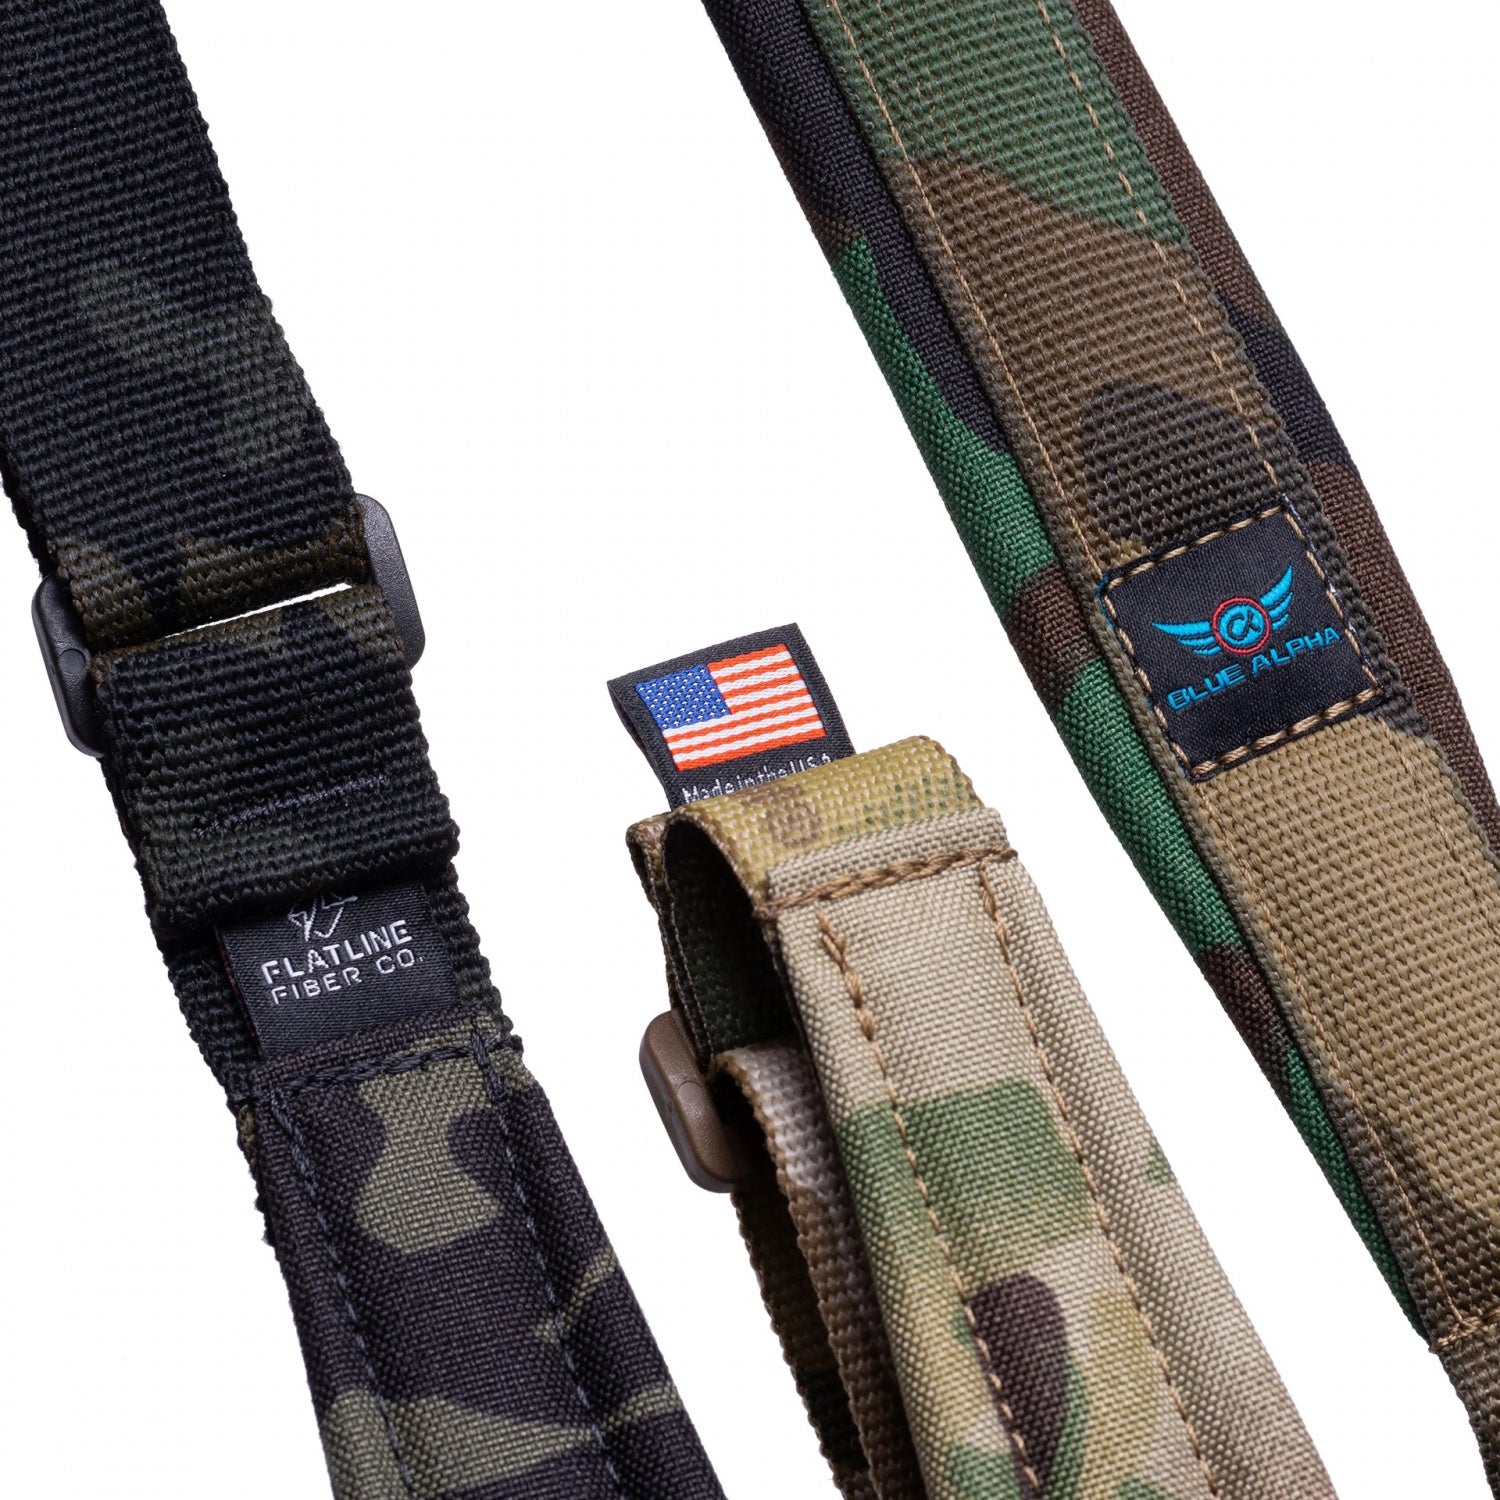 Introducing the New Blue Alpha Padded Rifle Sling 